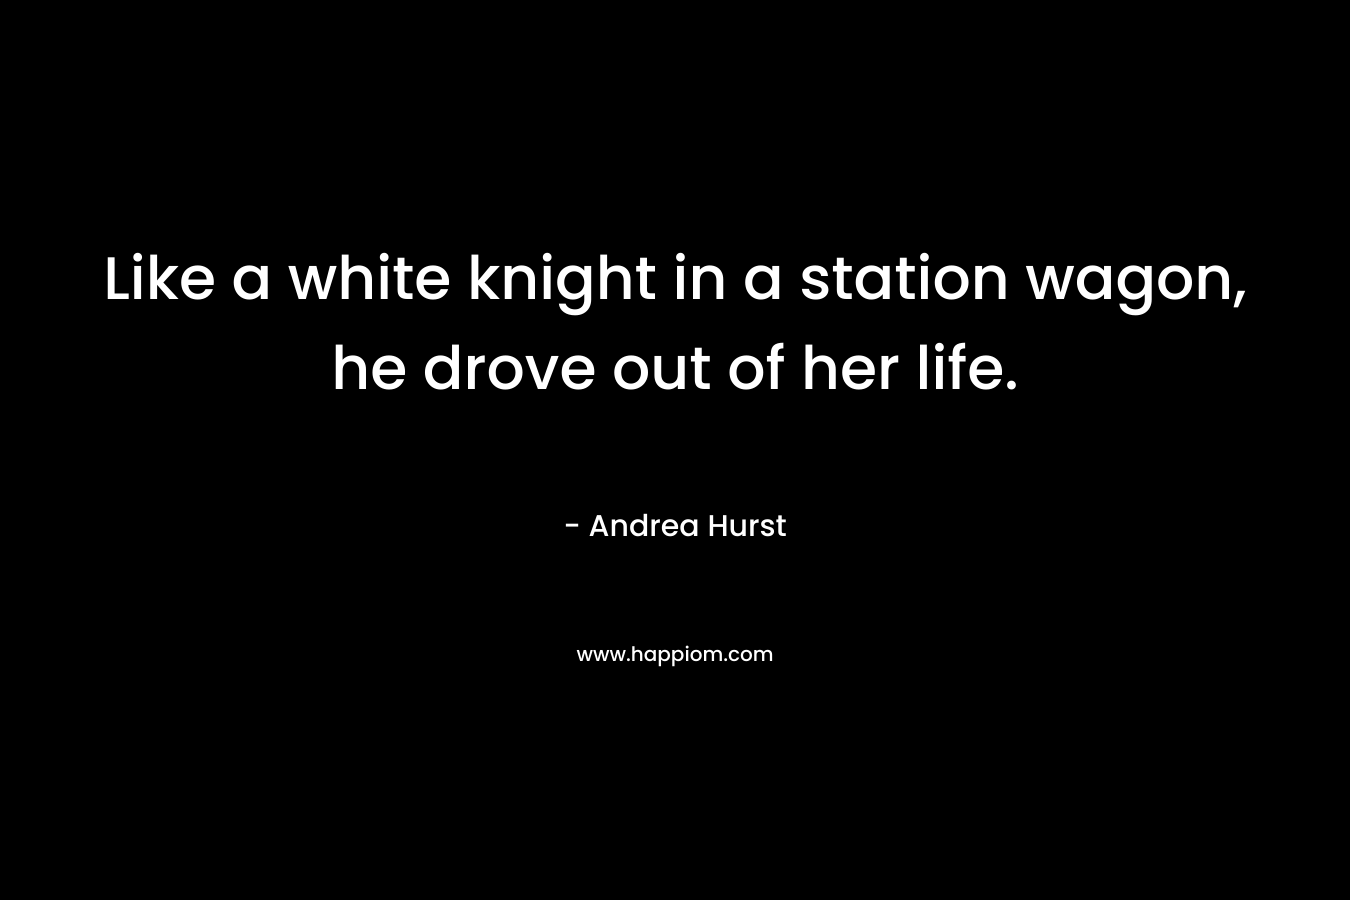 Like a white knight in a station wagon, he drove out of her life. – Andrea Hurst